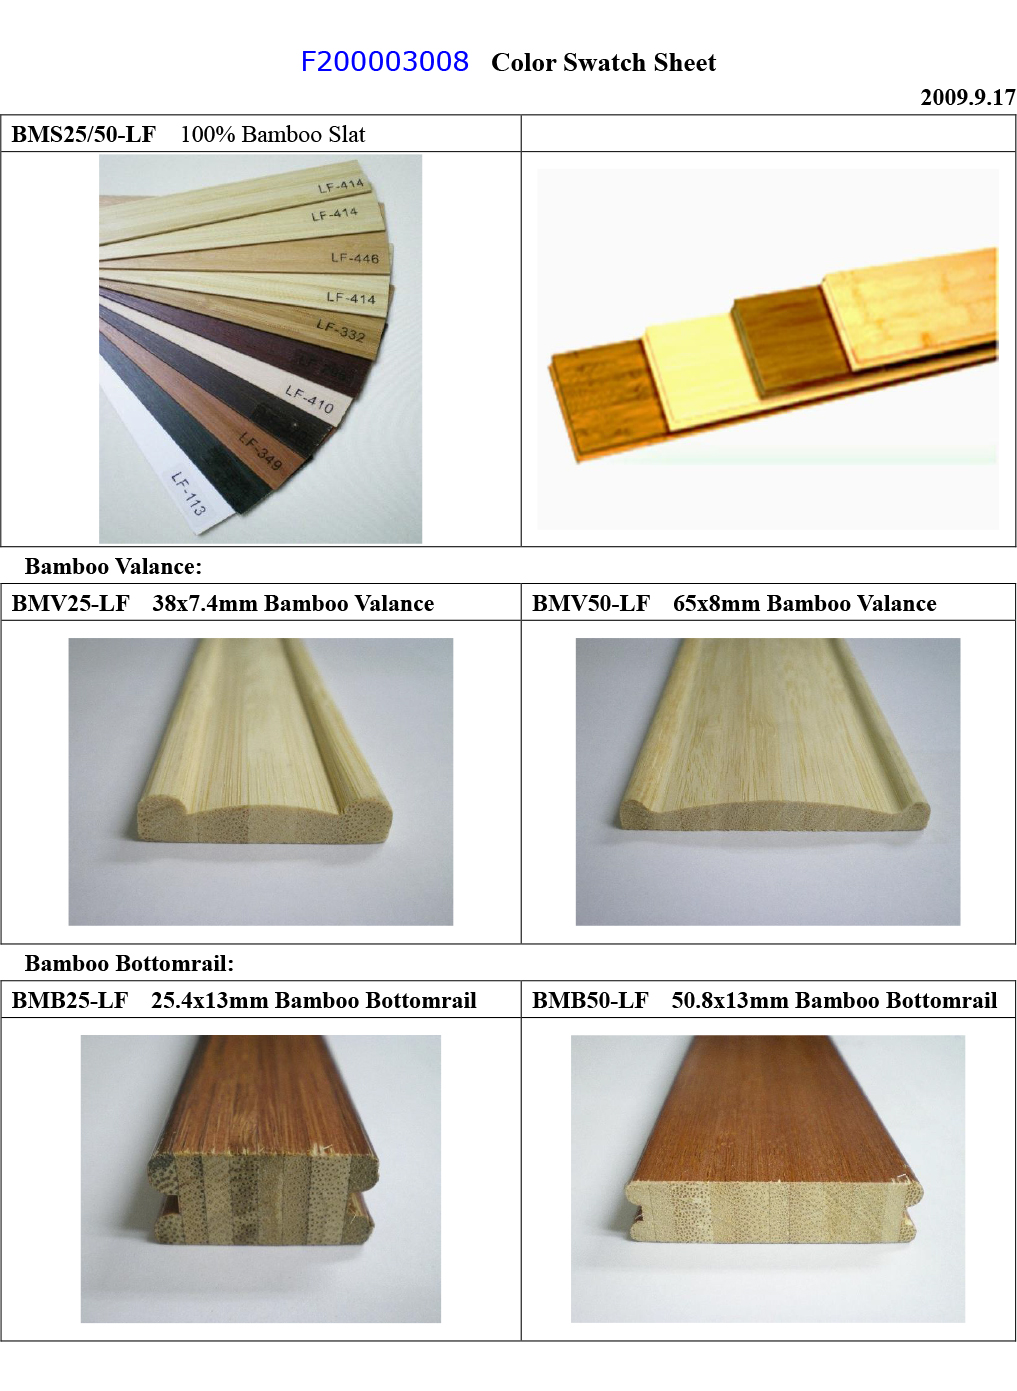 proimages/F200003008-100-Bamboo-Color-Swatch-Sheet.jpg